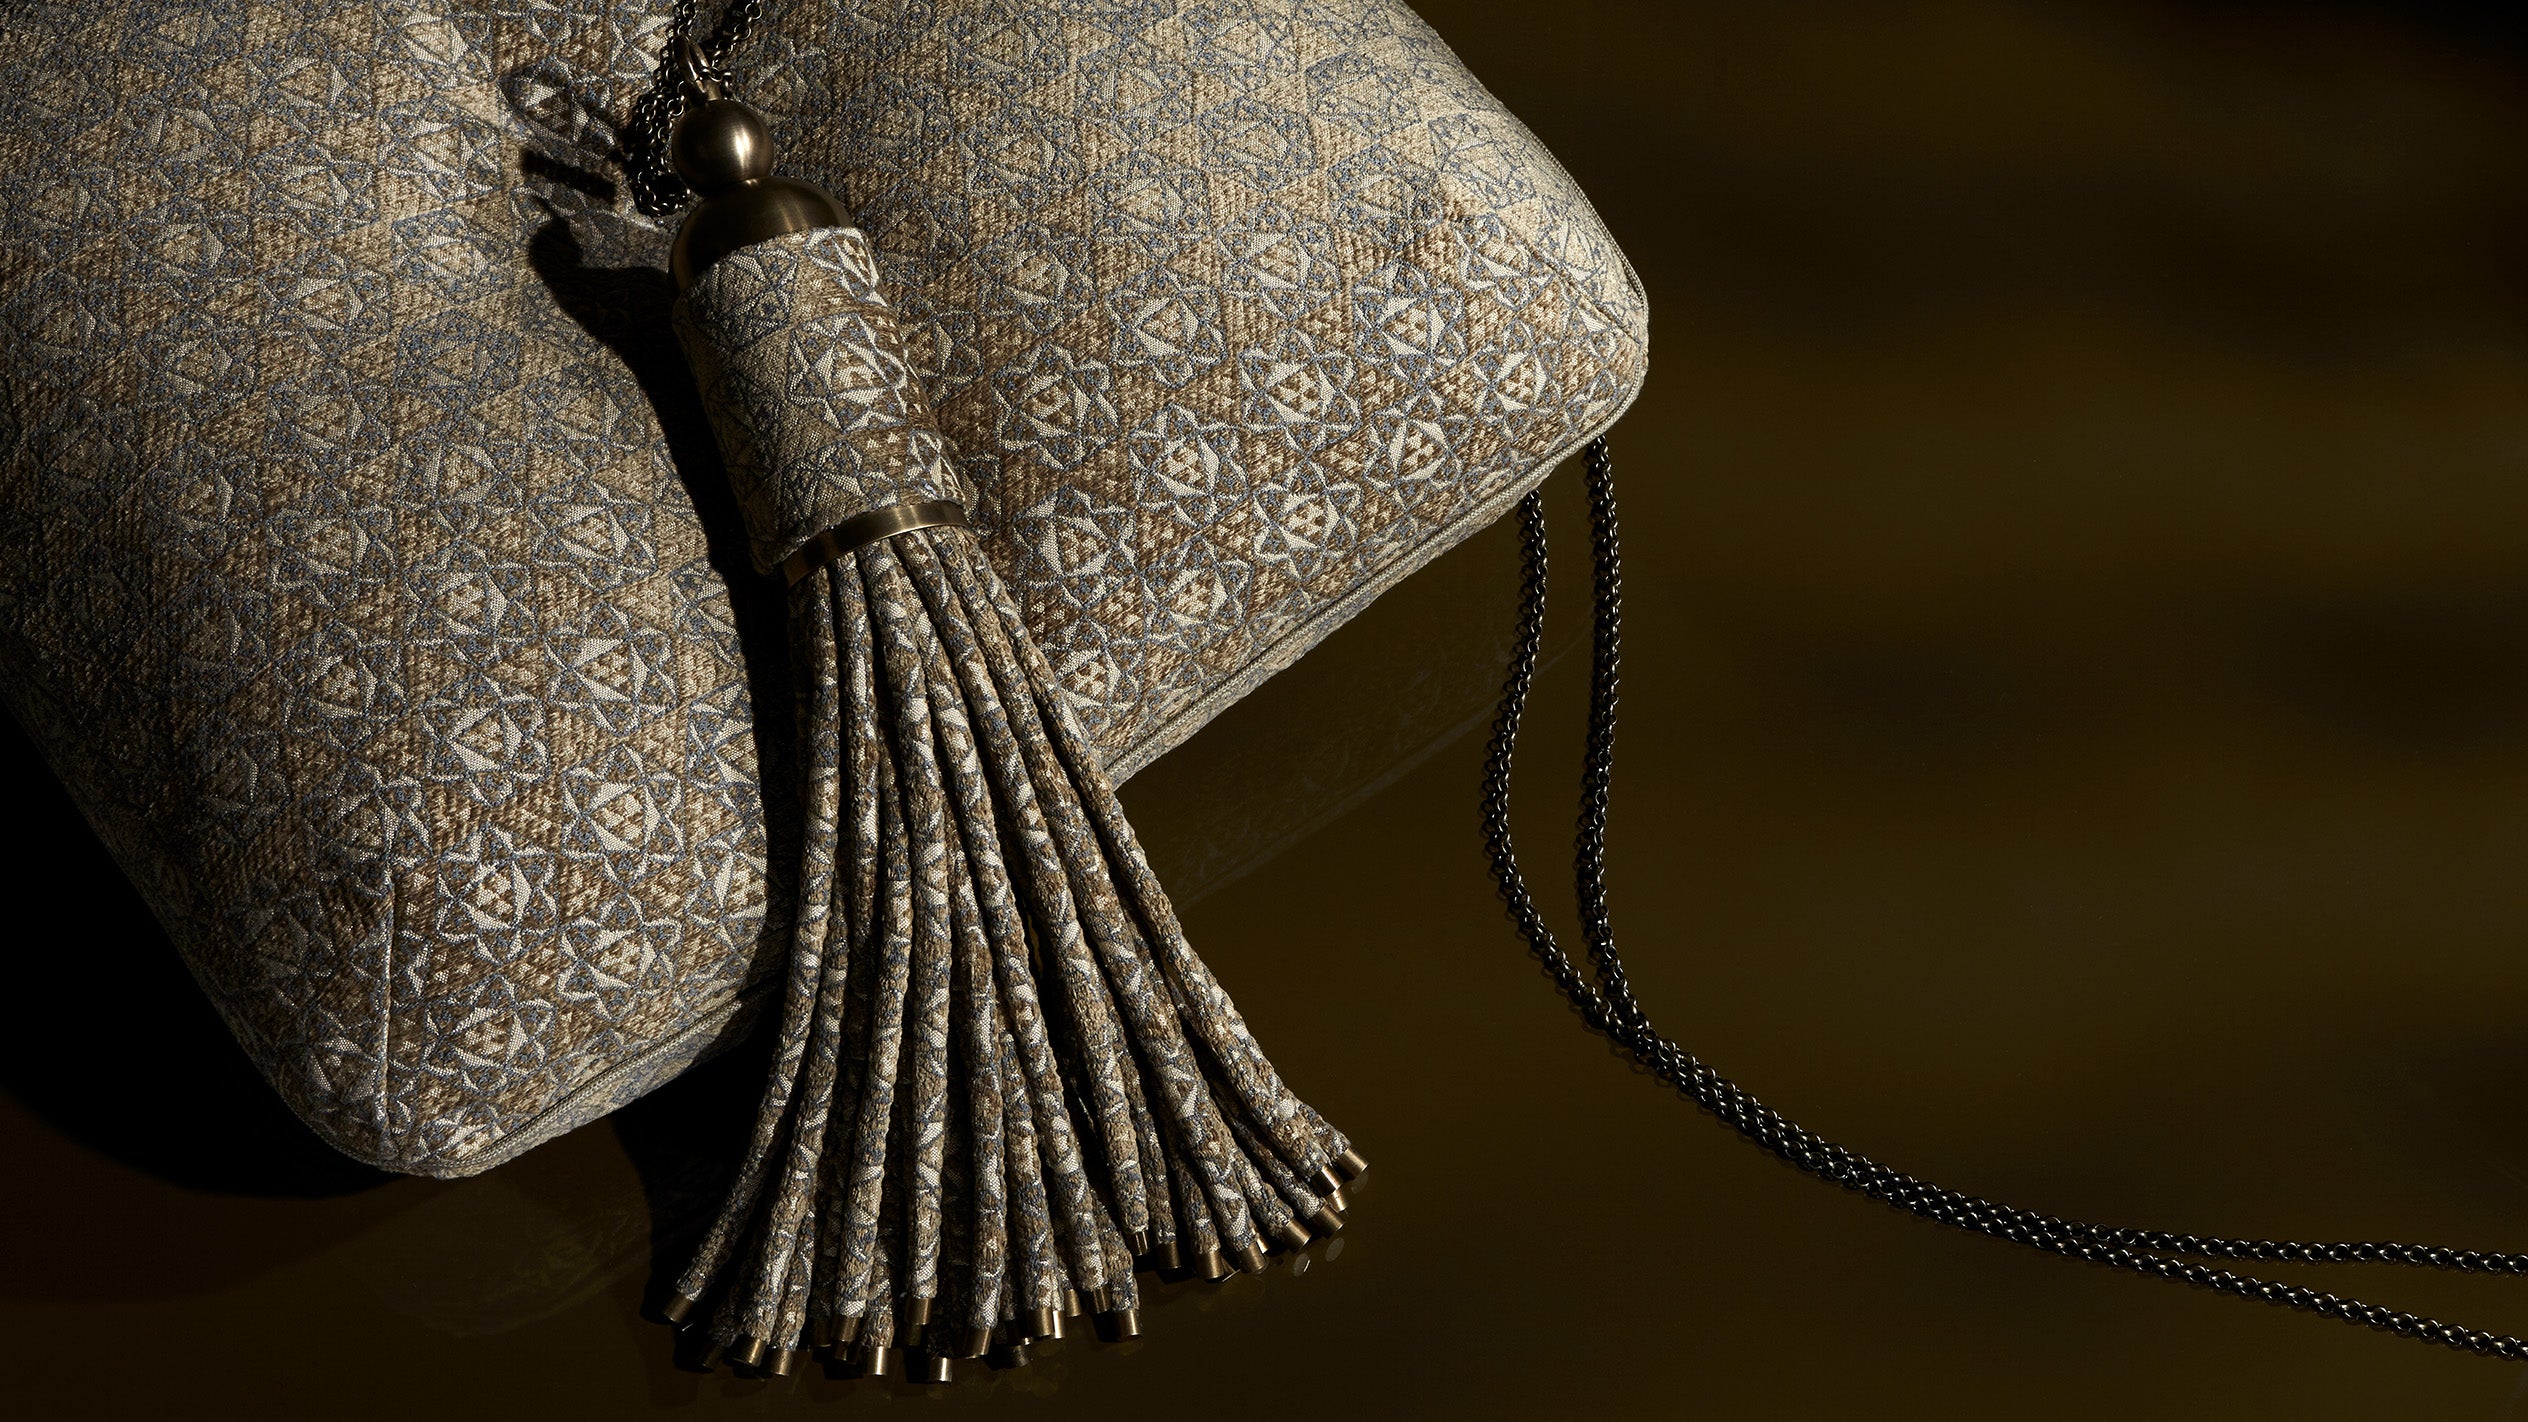 Close up of a tassel and cushion showing details of the patterned upholstery. 